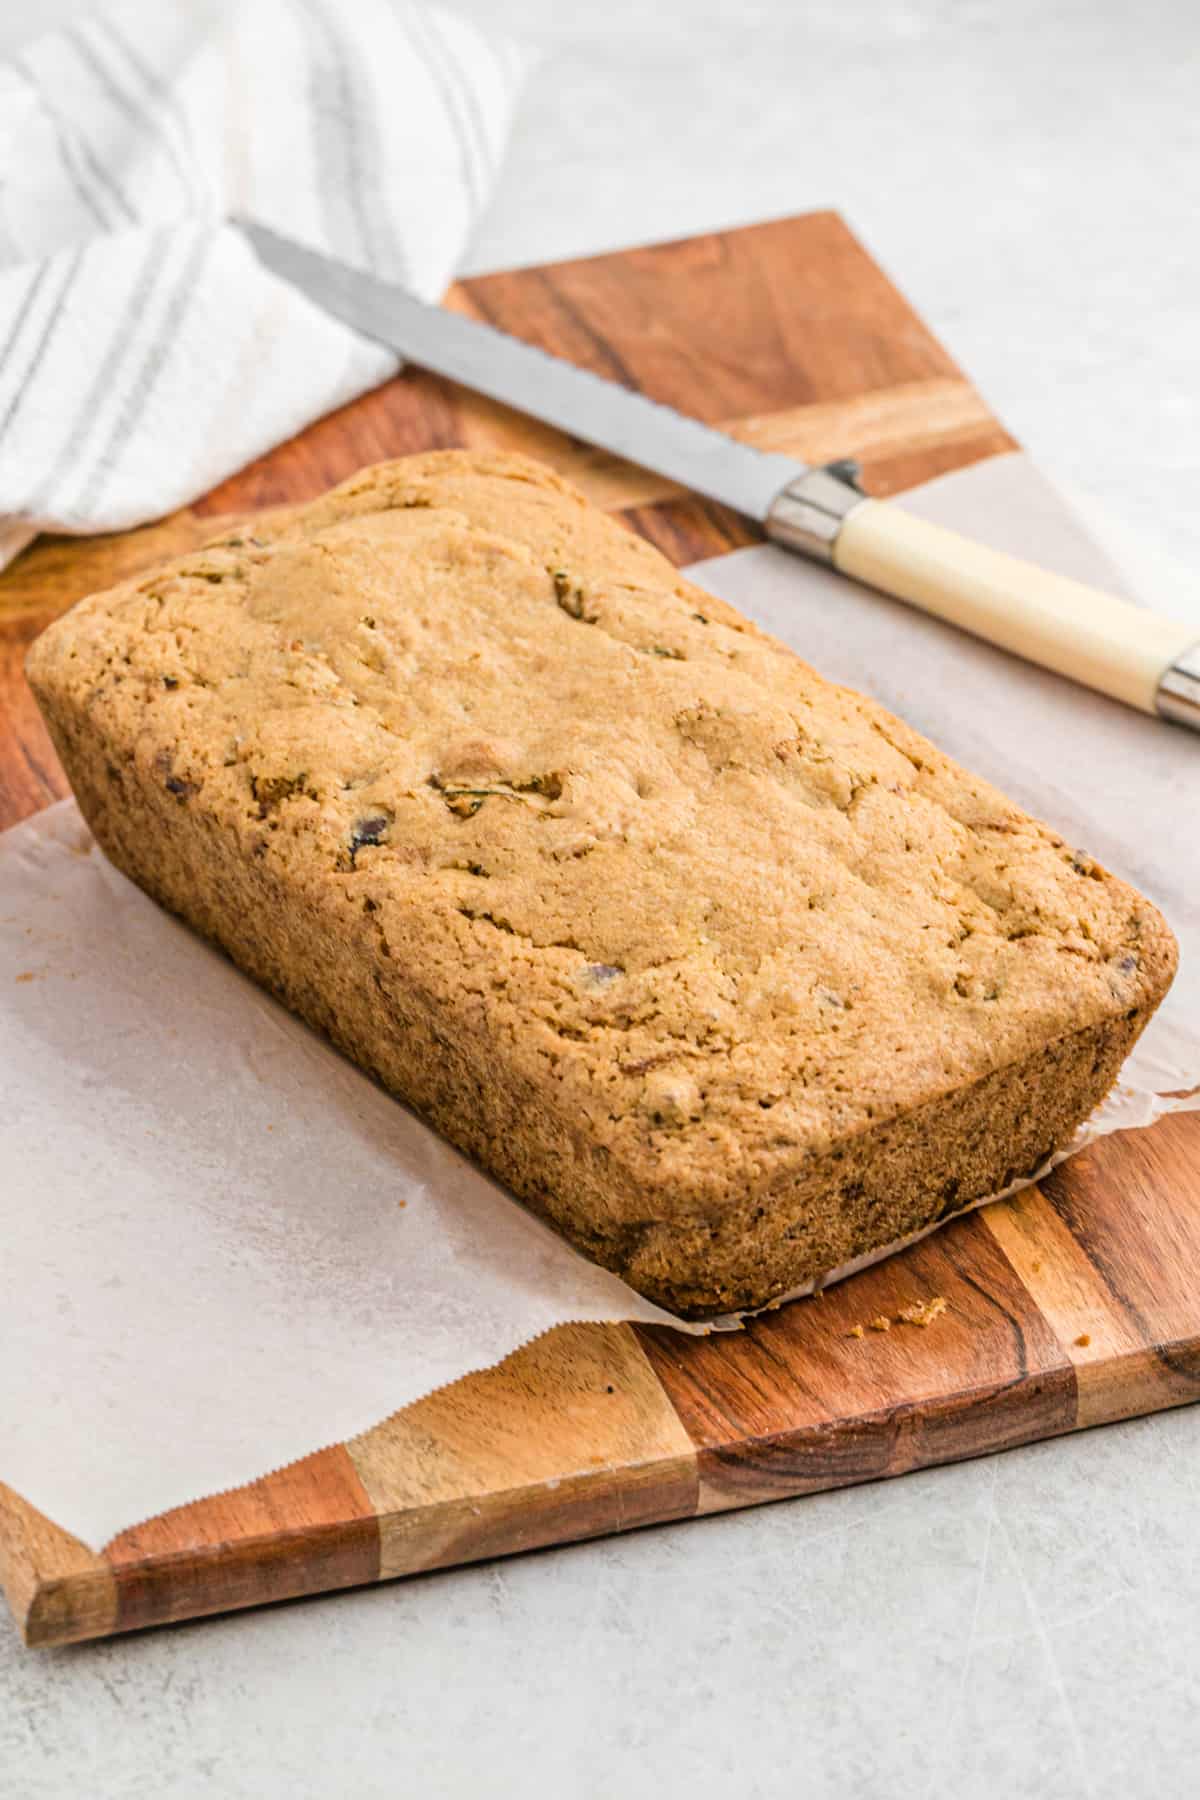 A fresh loaf of chocolate chip zucchini bread on a wooden cutting board.